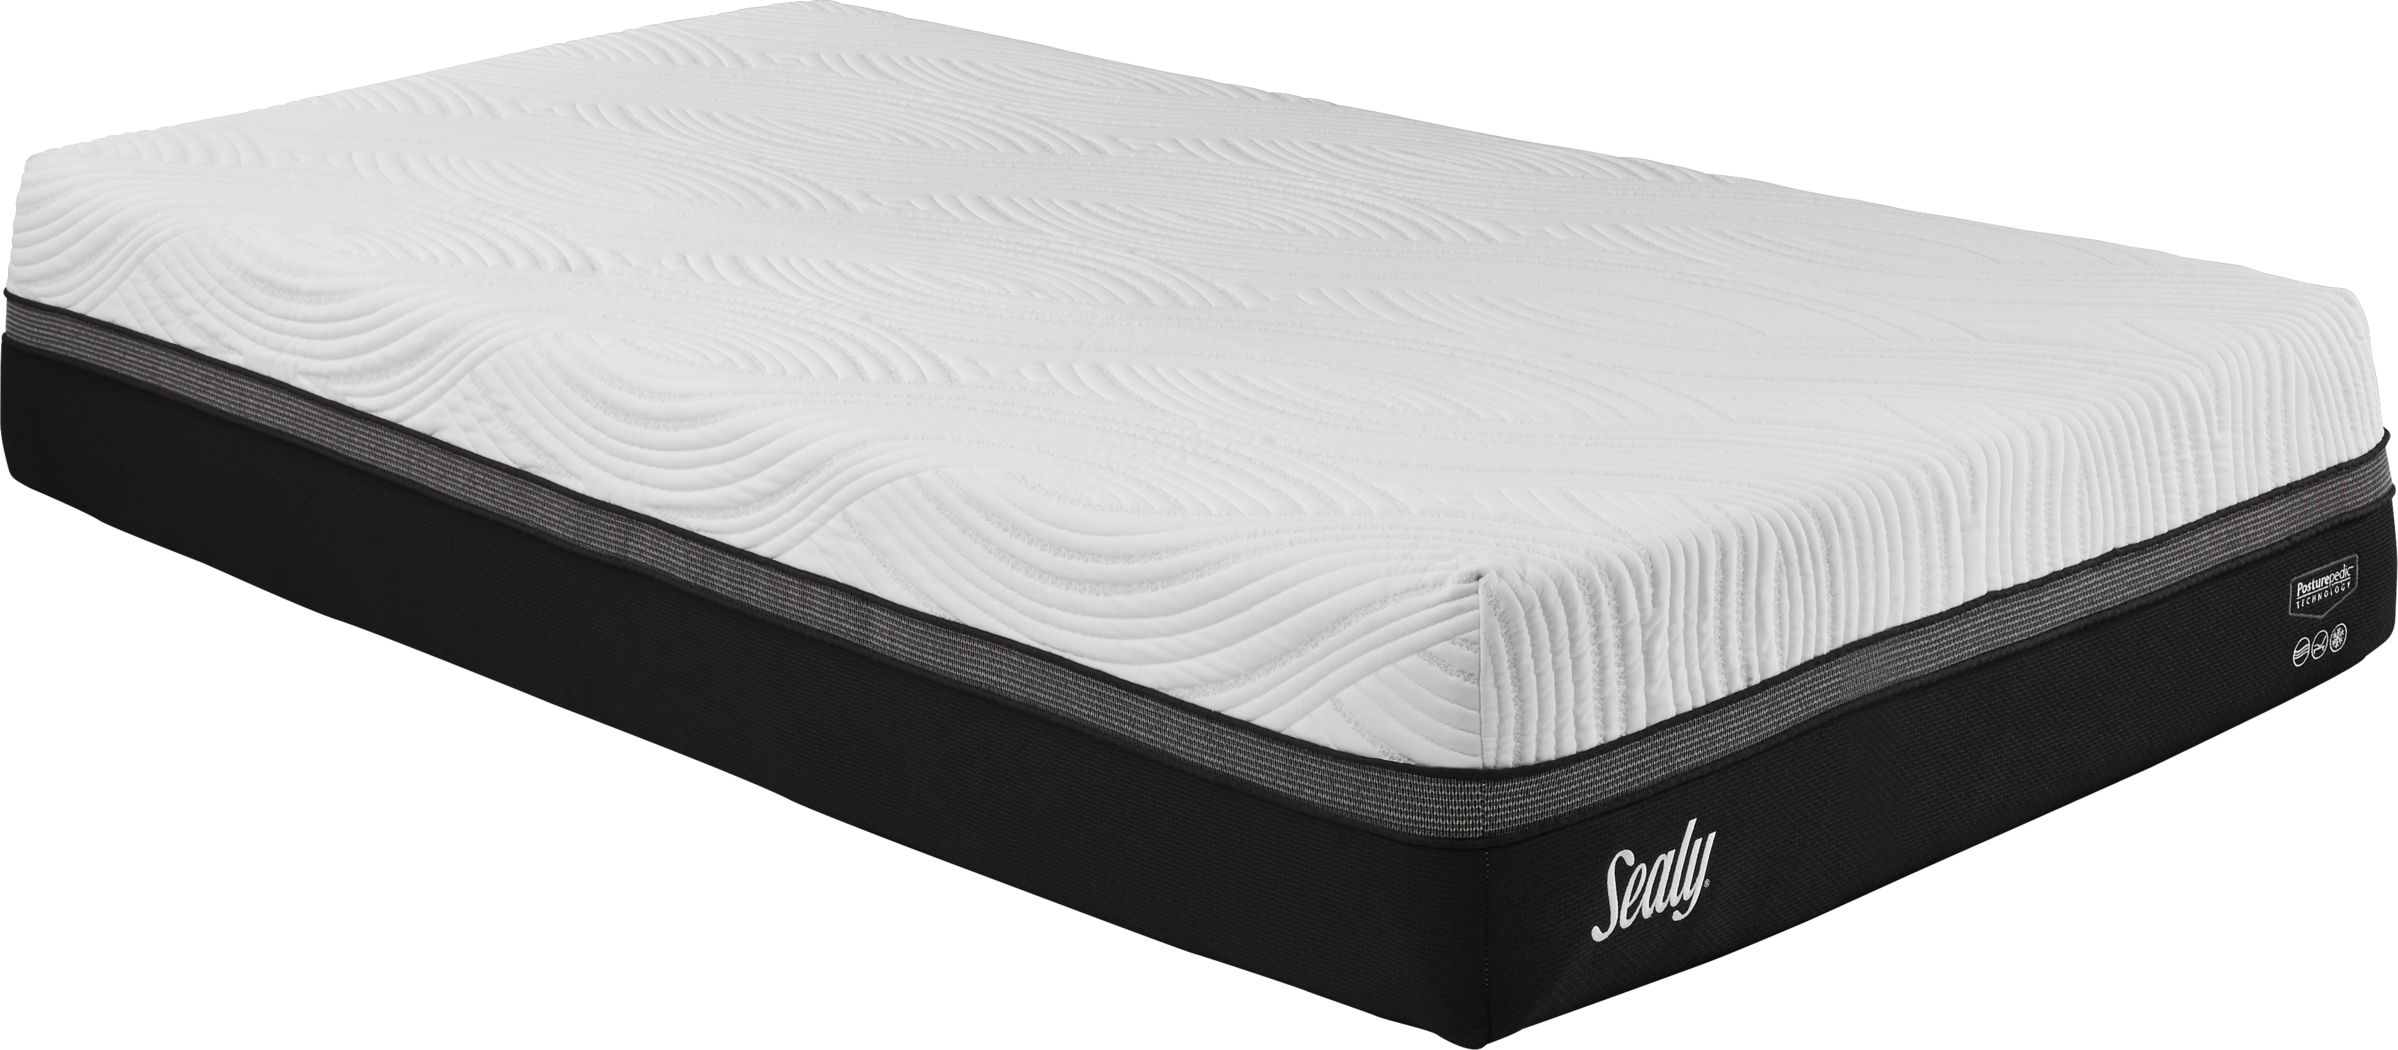 sealy mattress toppers for twin xl